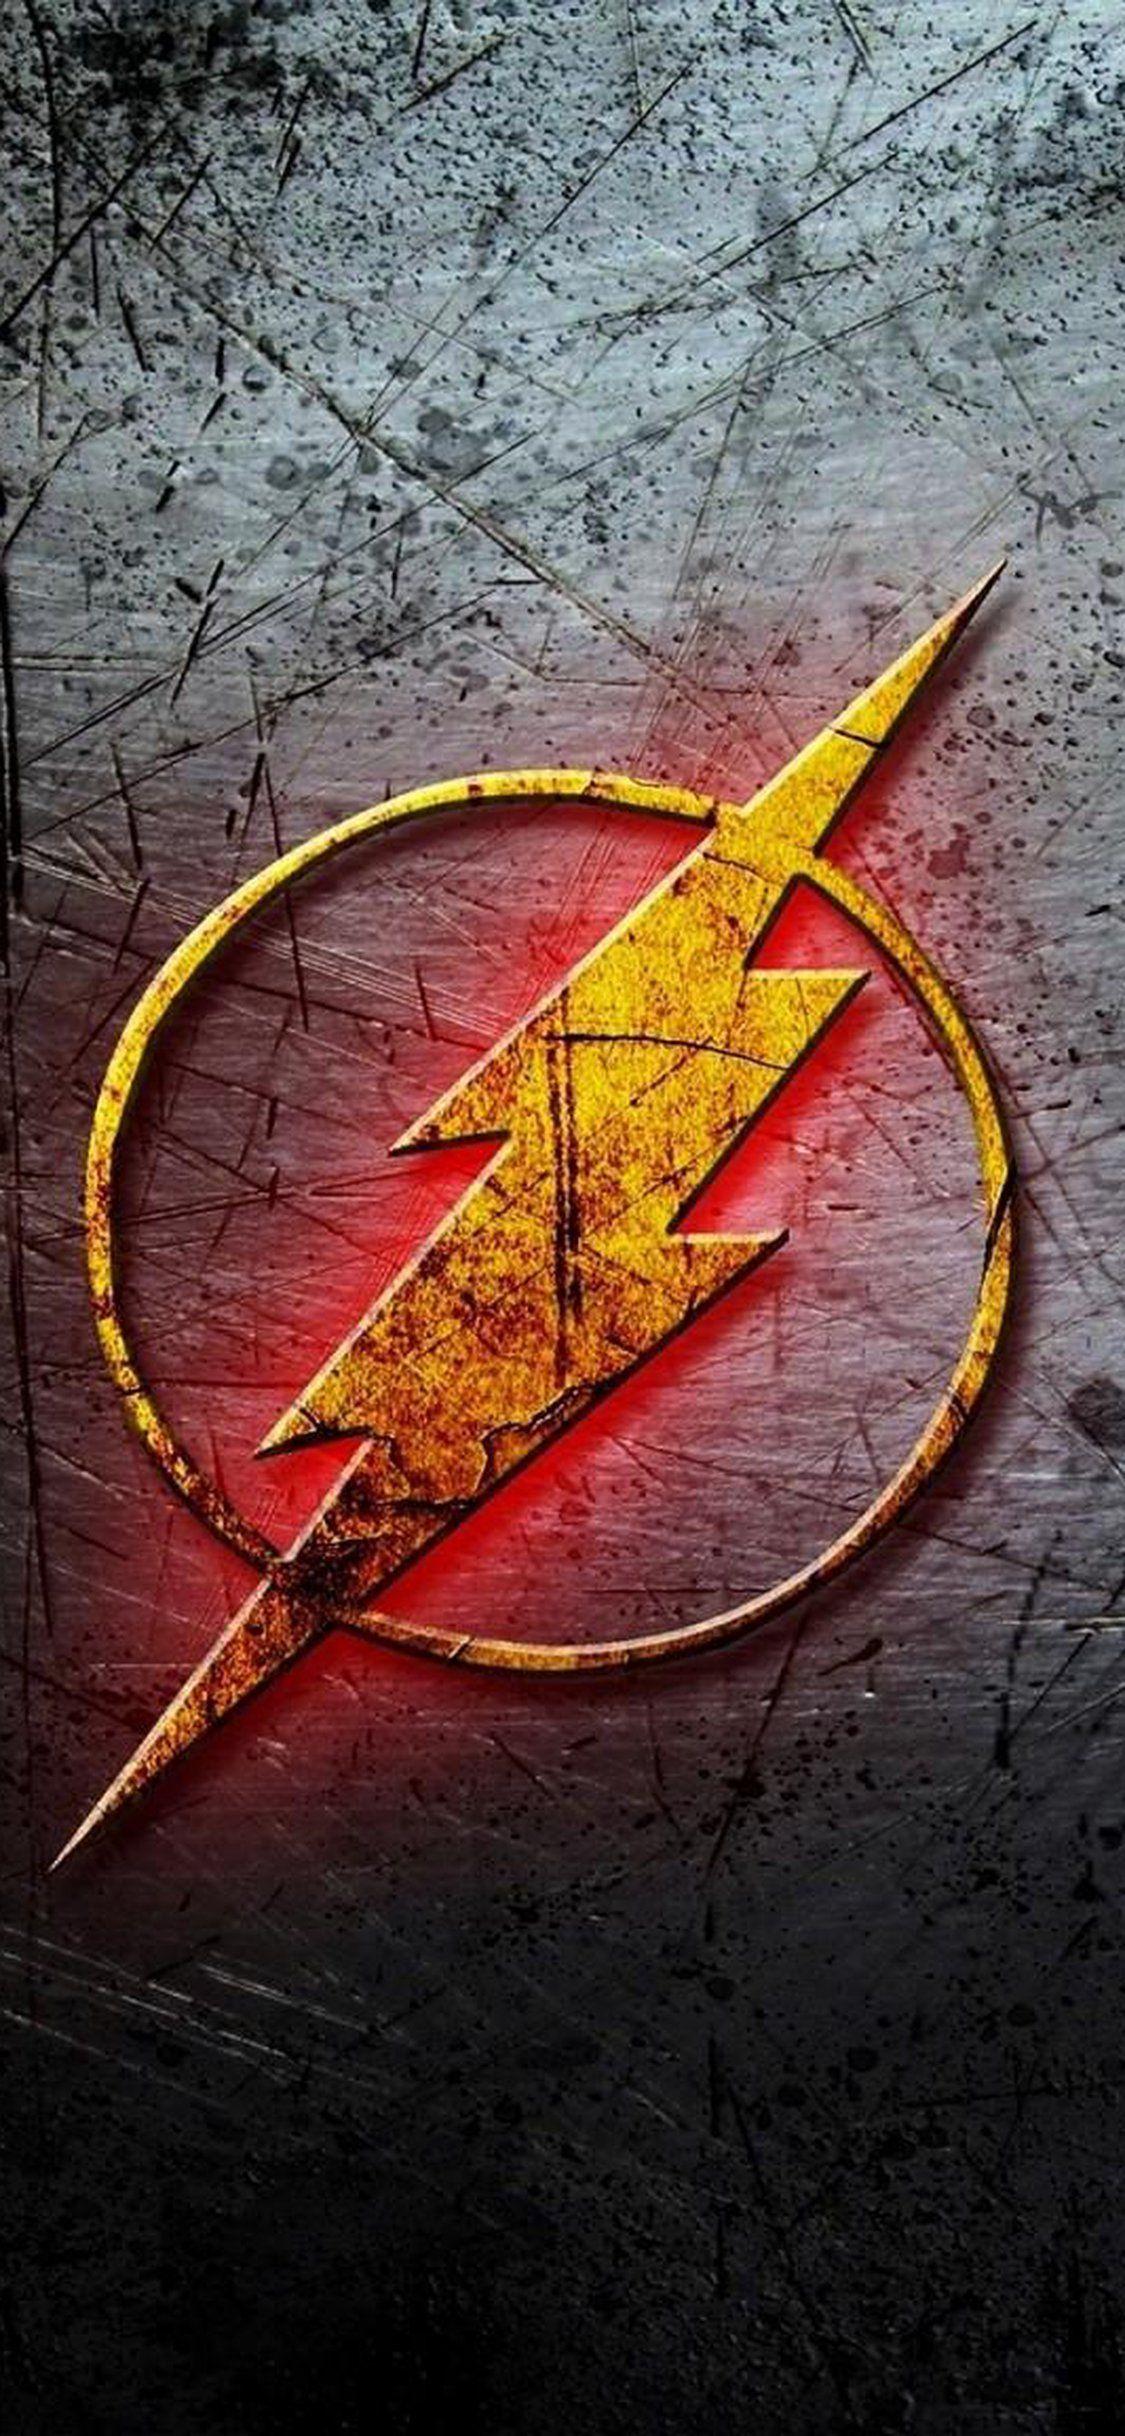 The Flash Iphone Wallpapers Top Free The Flash Iphone Backgrounds Wallpaperaccess